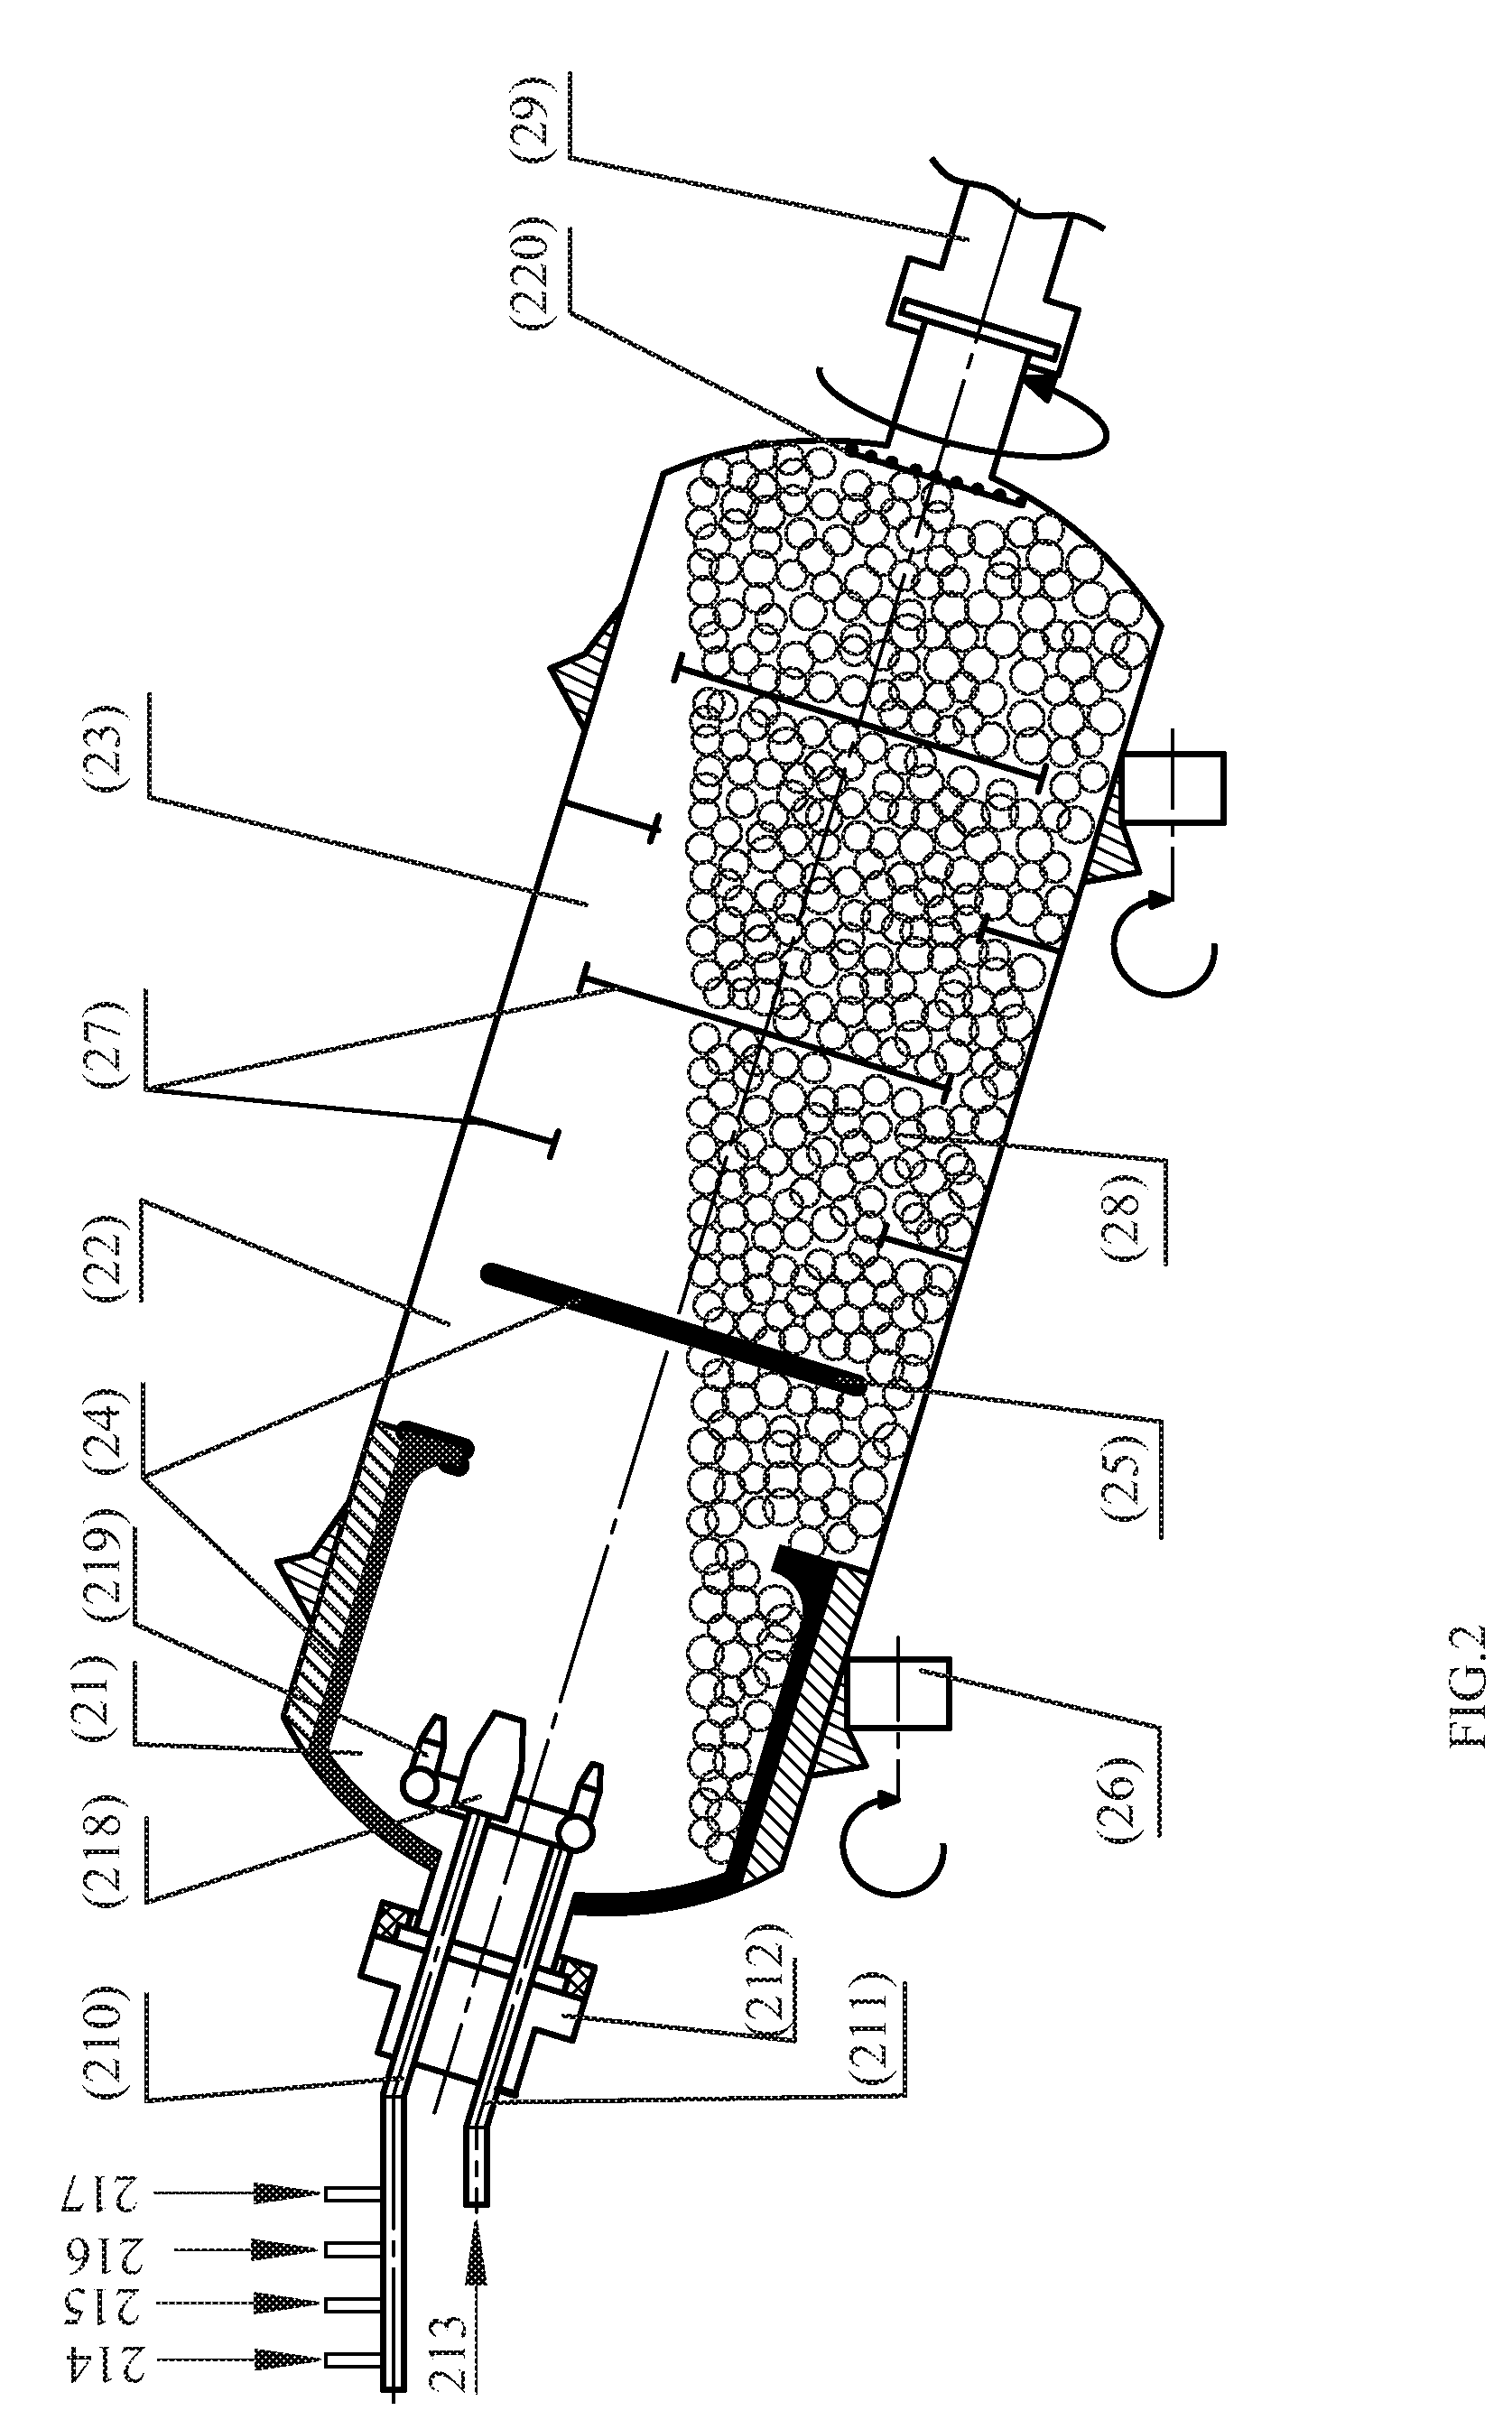 Reaction chamber for a direct contact rotating steam generator